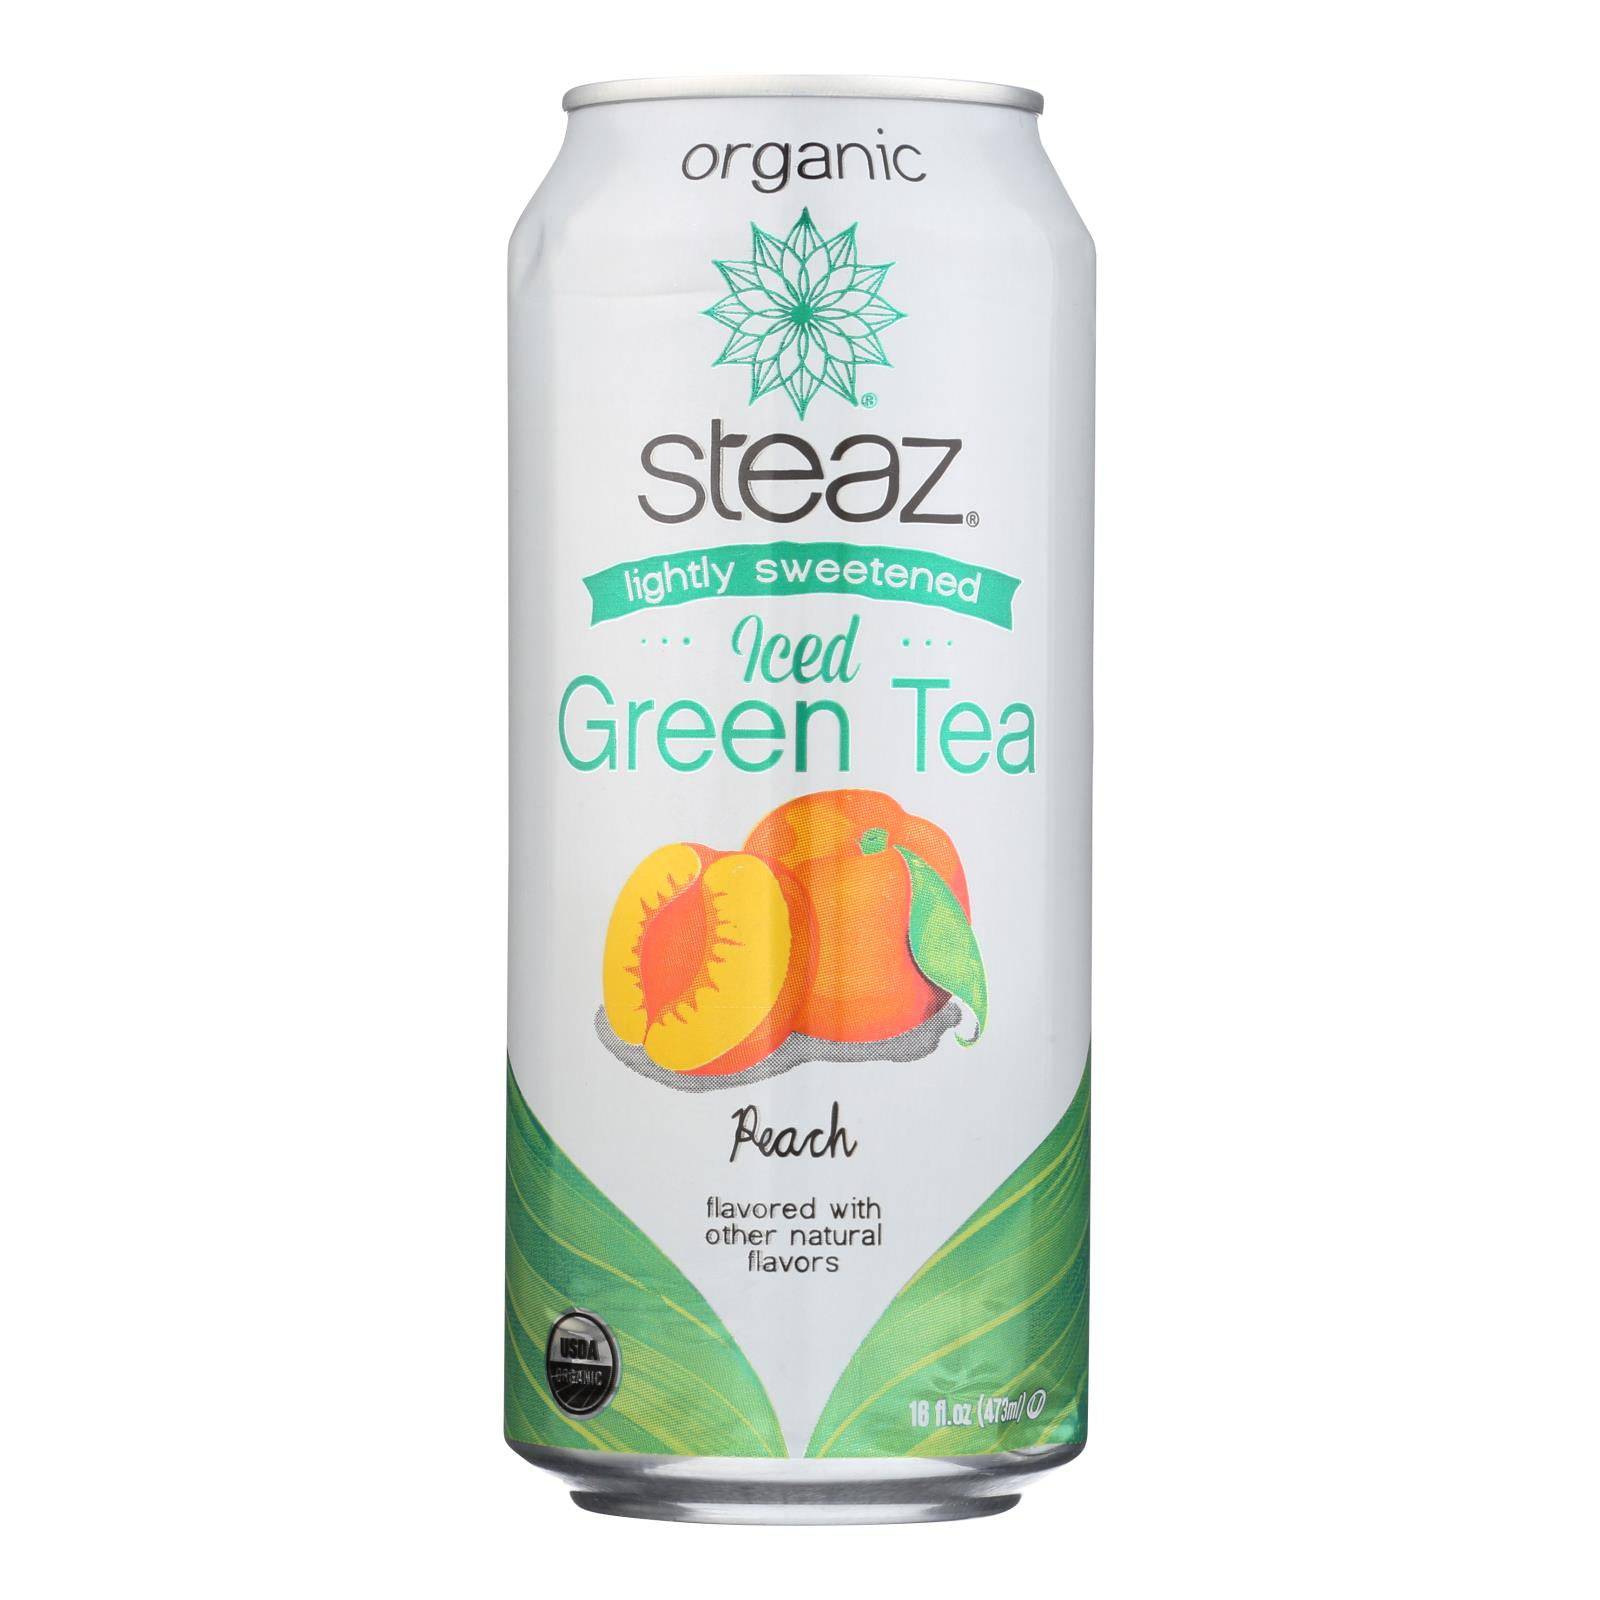 Buy Steaz Lightly Sweetened Green Tea - Peach - Case Of 12 - 16 Fl Oz.  at OnlyNaturals.us